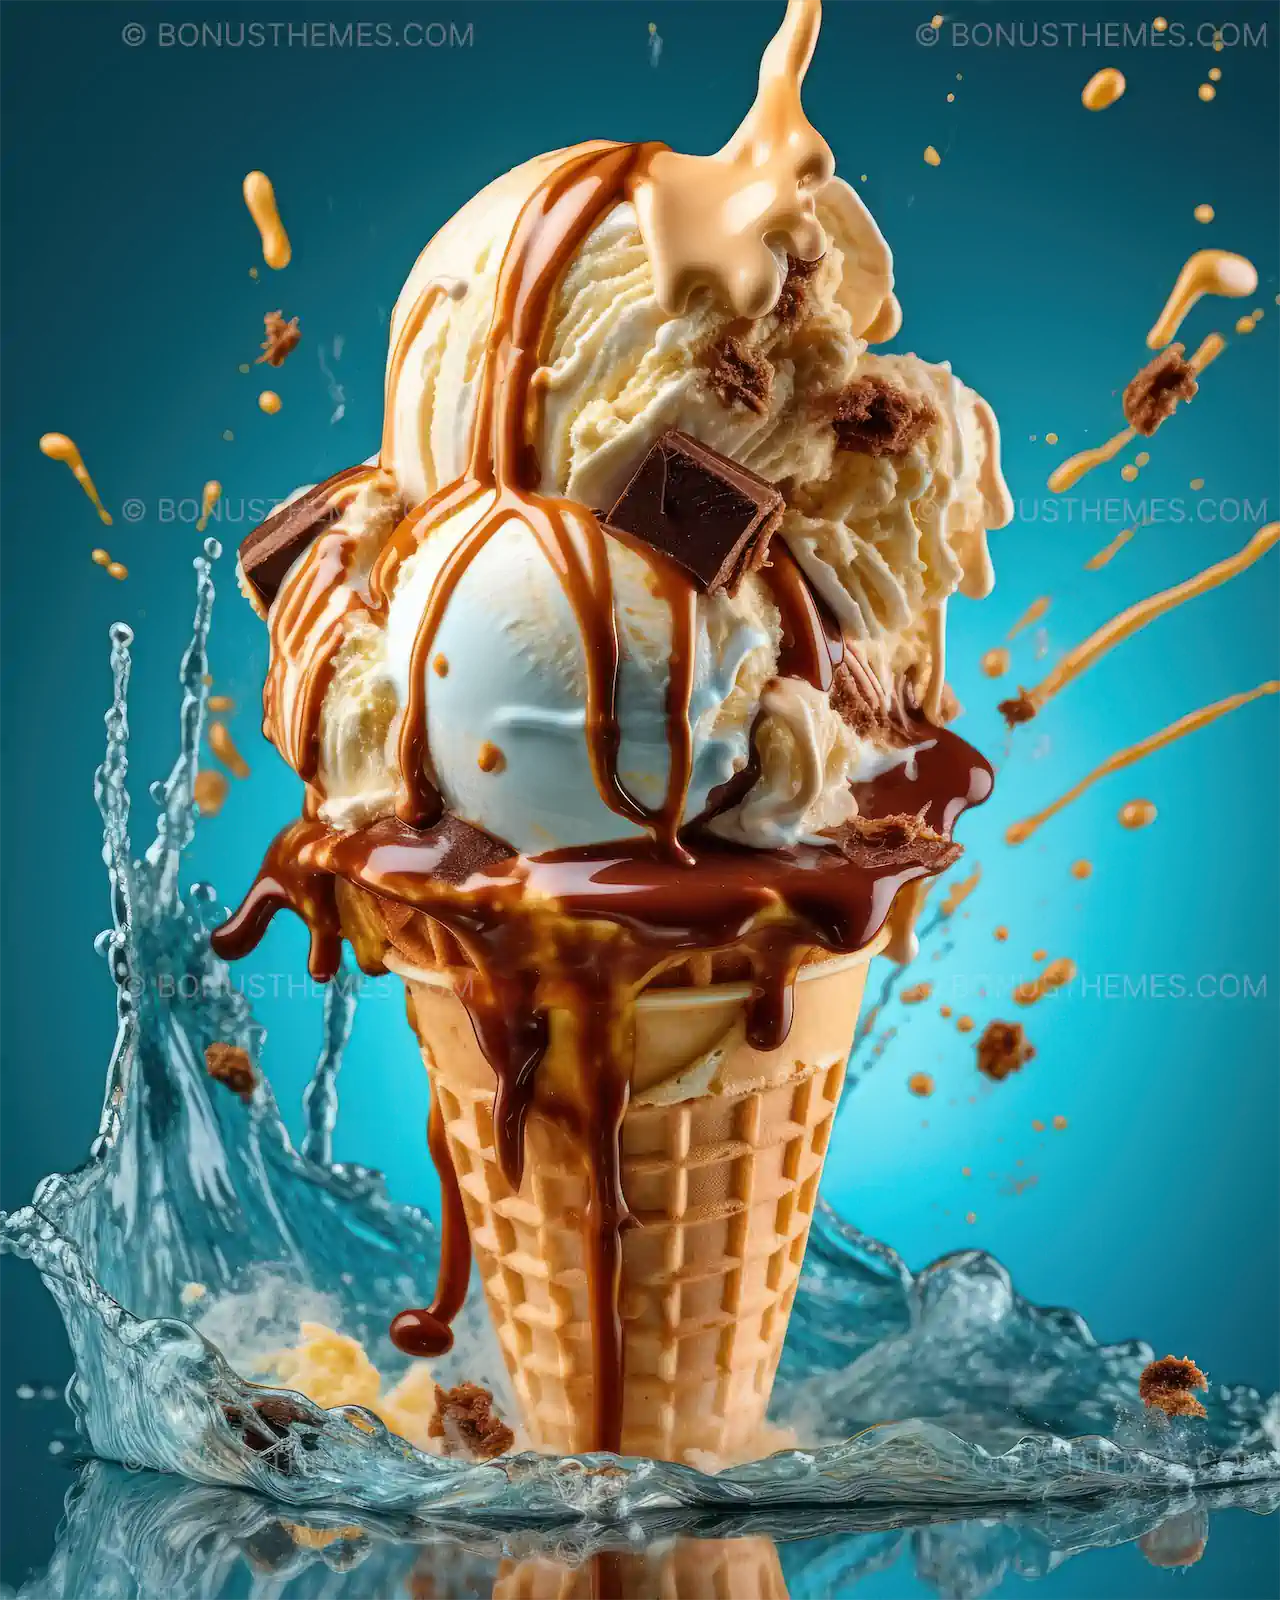 Ice cream cone with chocolate syrup